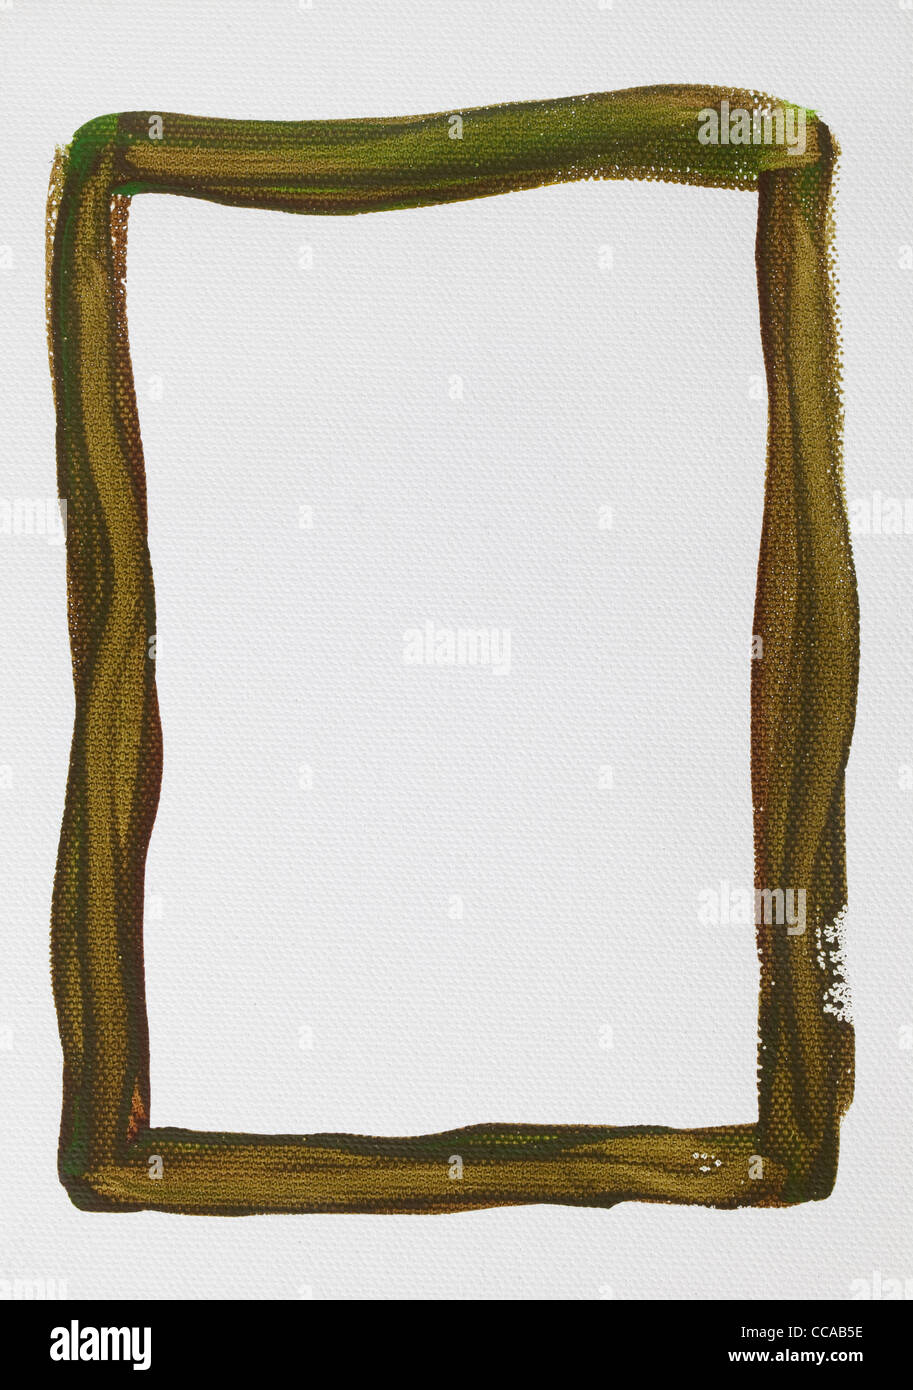 hand painted green and brown watercolor frame (border) surrounding white blank rectangle on artist canvas with a coarse texture Stock Photo